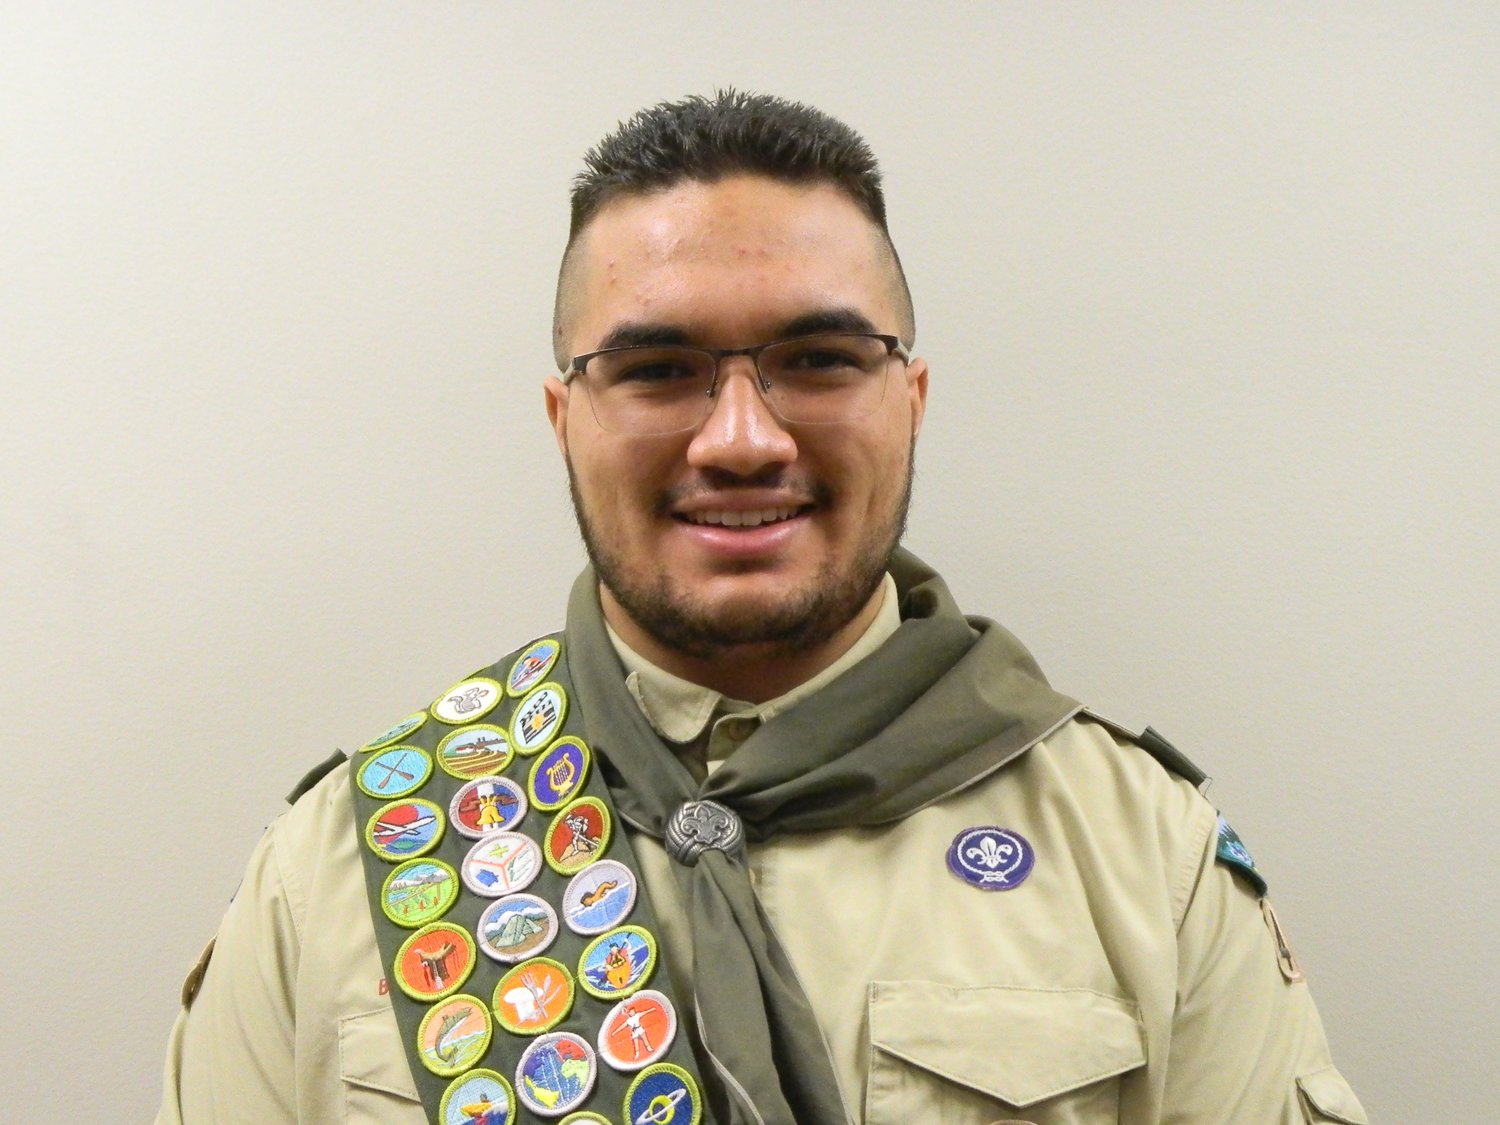 Tai Talitiga Tumanvao of Boy Scout Troop 496 led a group of scouts and adult volunteers in building corn hole games for Prune Hill Elementary. Tai, 18, is the son of Willie and Mitzi Tumanvao and has a total of 64 hours of community service. He is a senior at Camas High School.